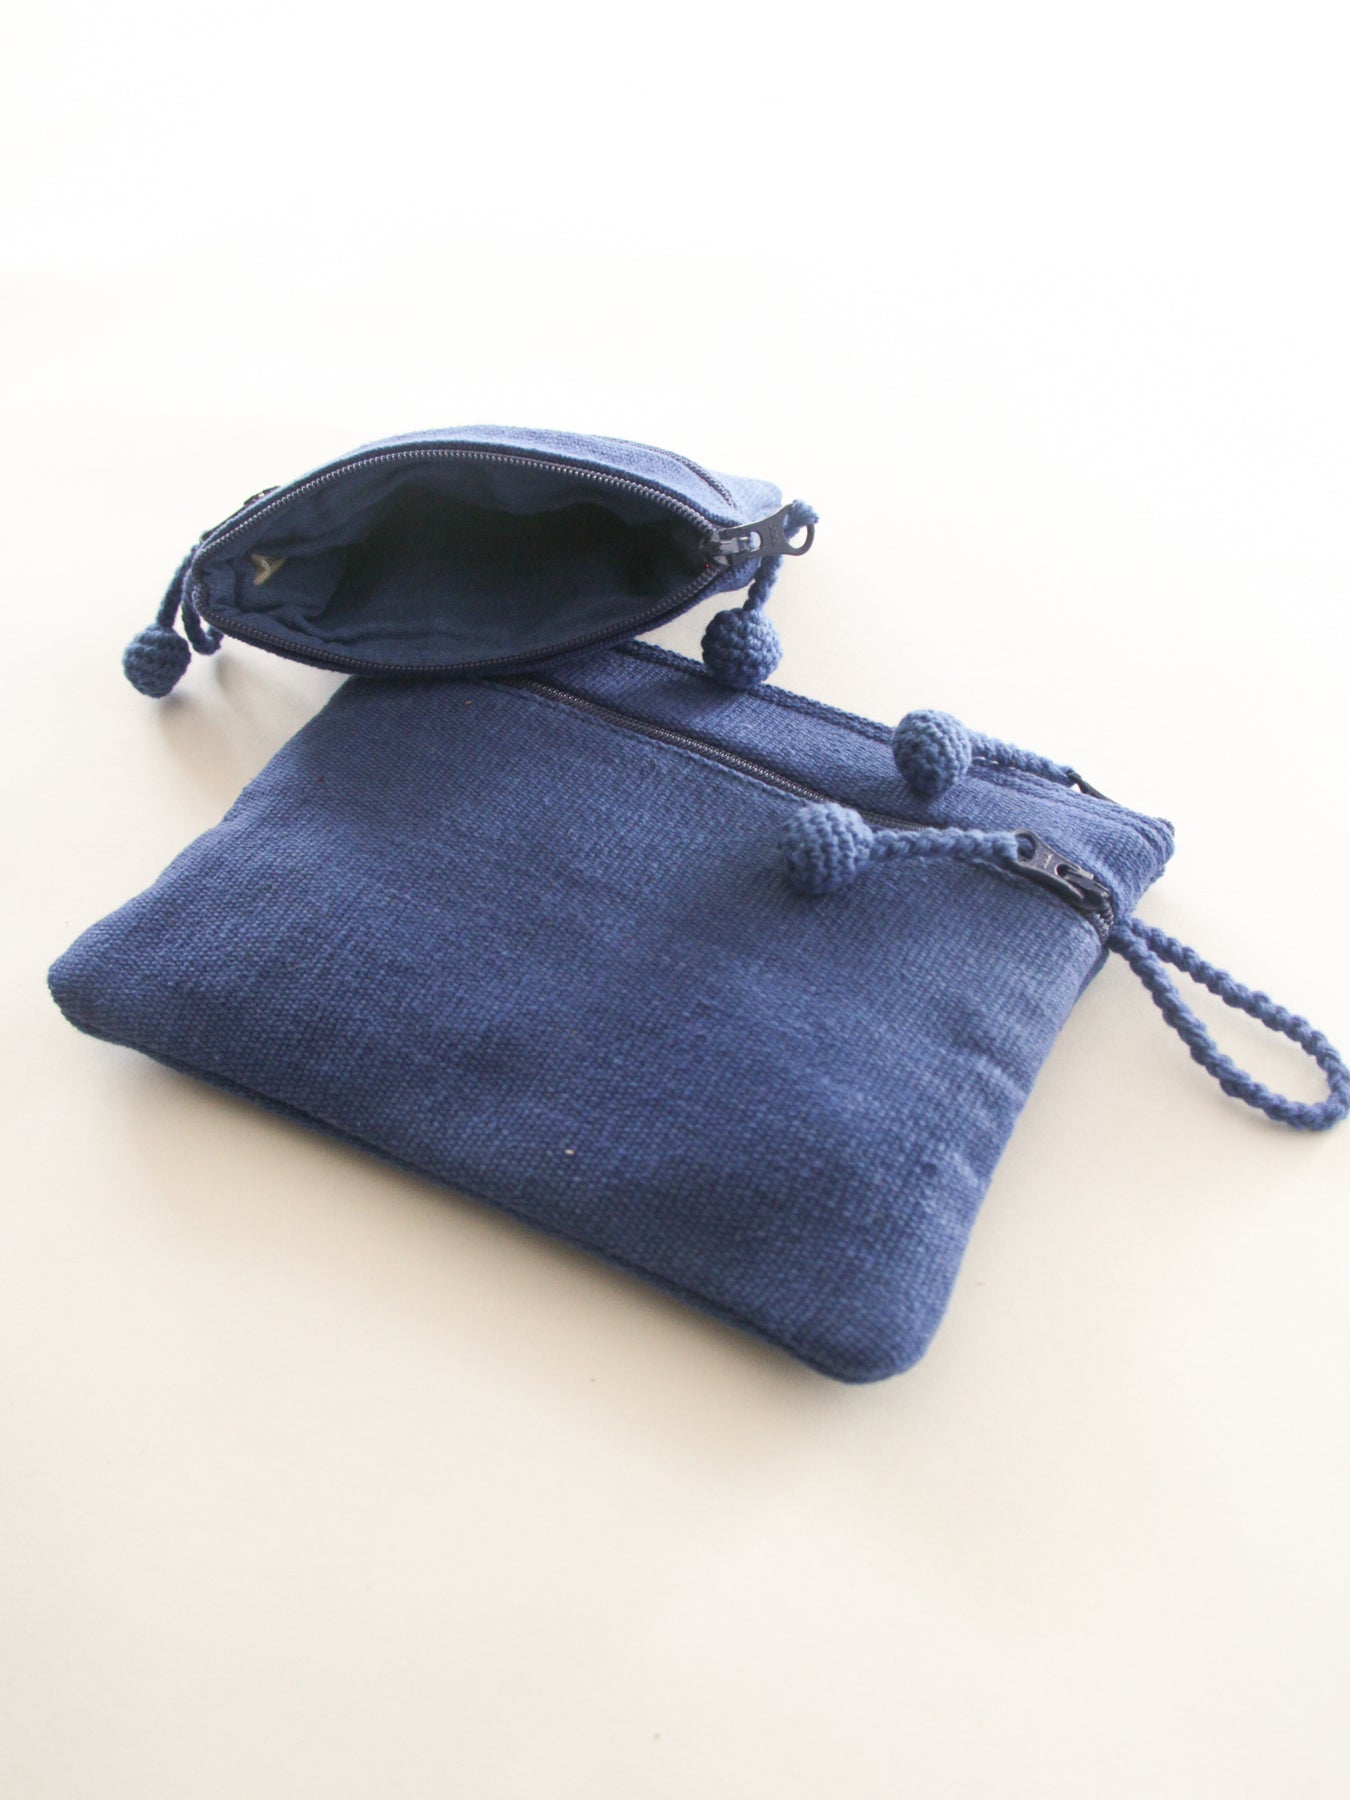 Buy Yoga Cylindrical Bag (Denim Blue with Pattern) On Snooplay India